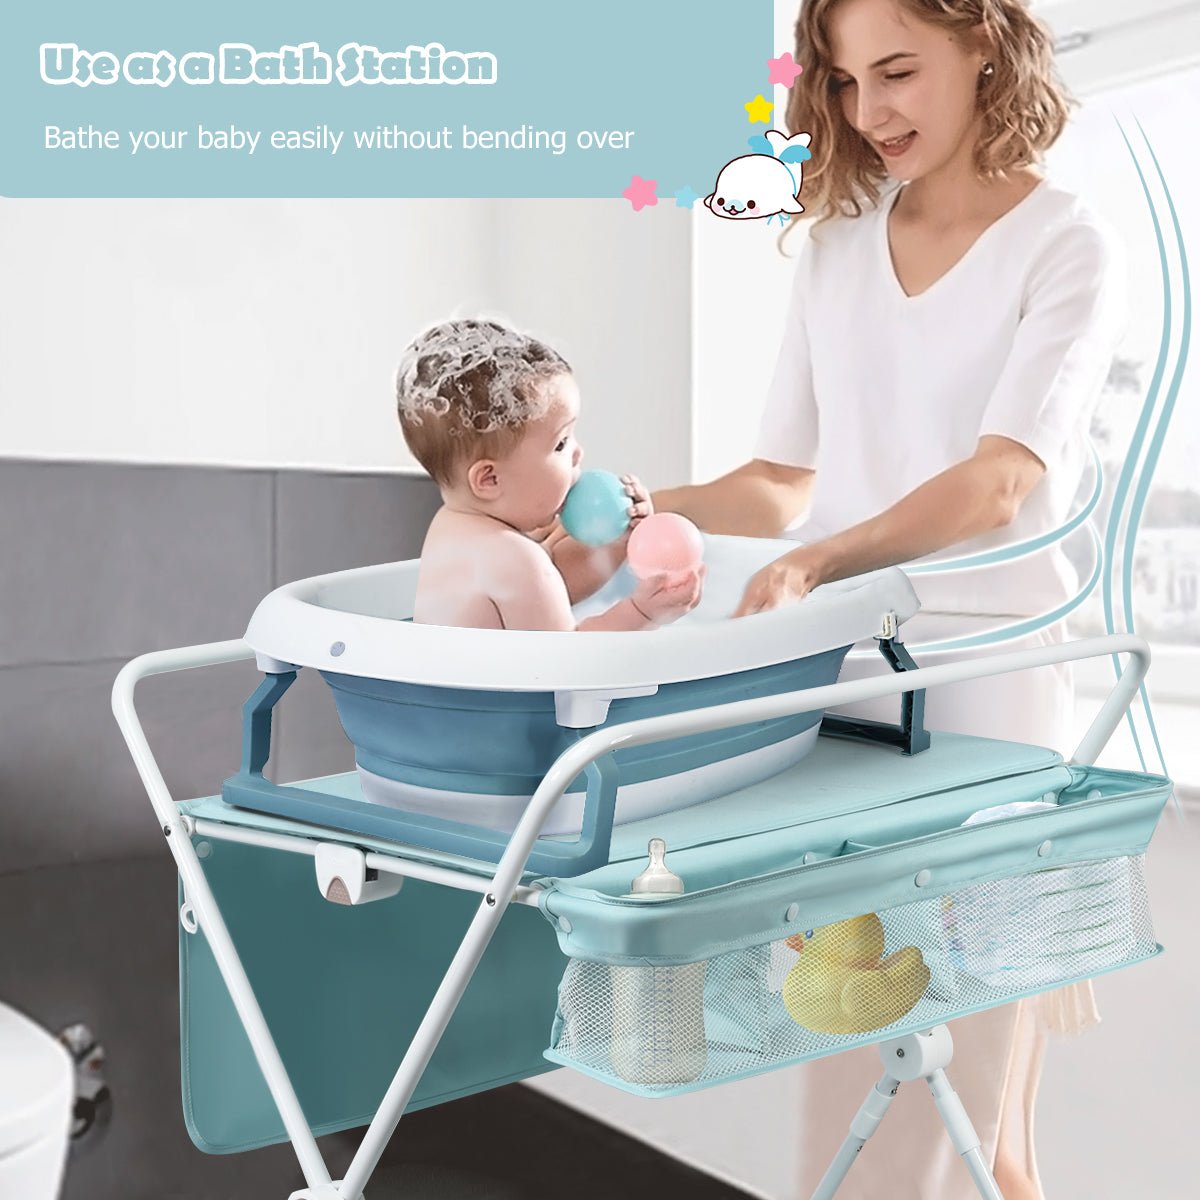 Travel-Friendly Adjustable Height Diaper Station - Blue Convenience for Parents